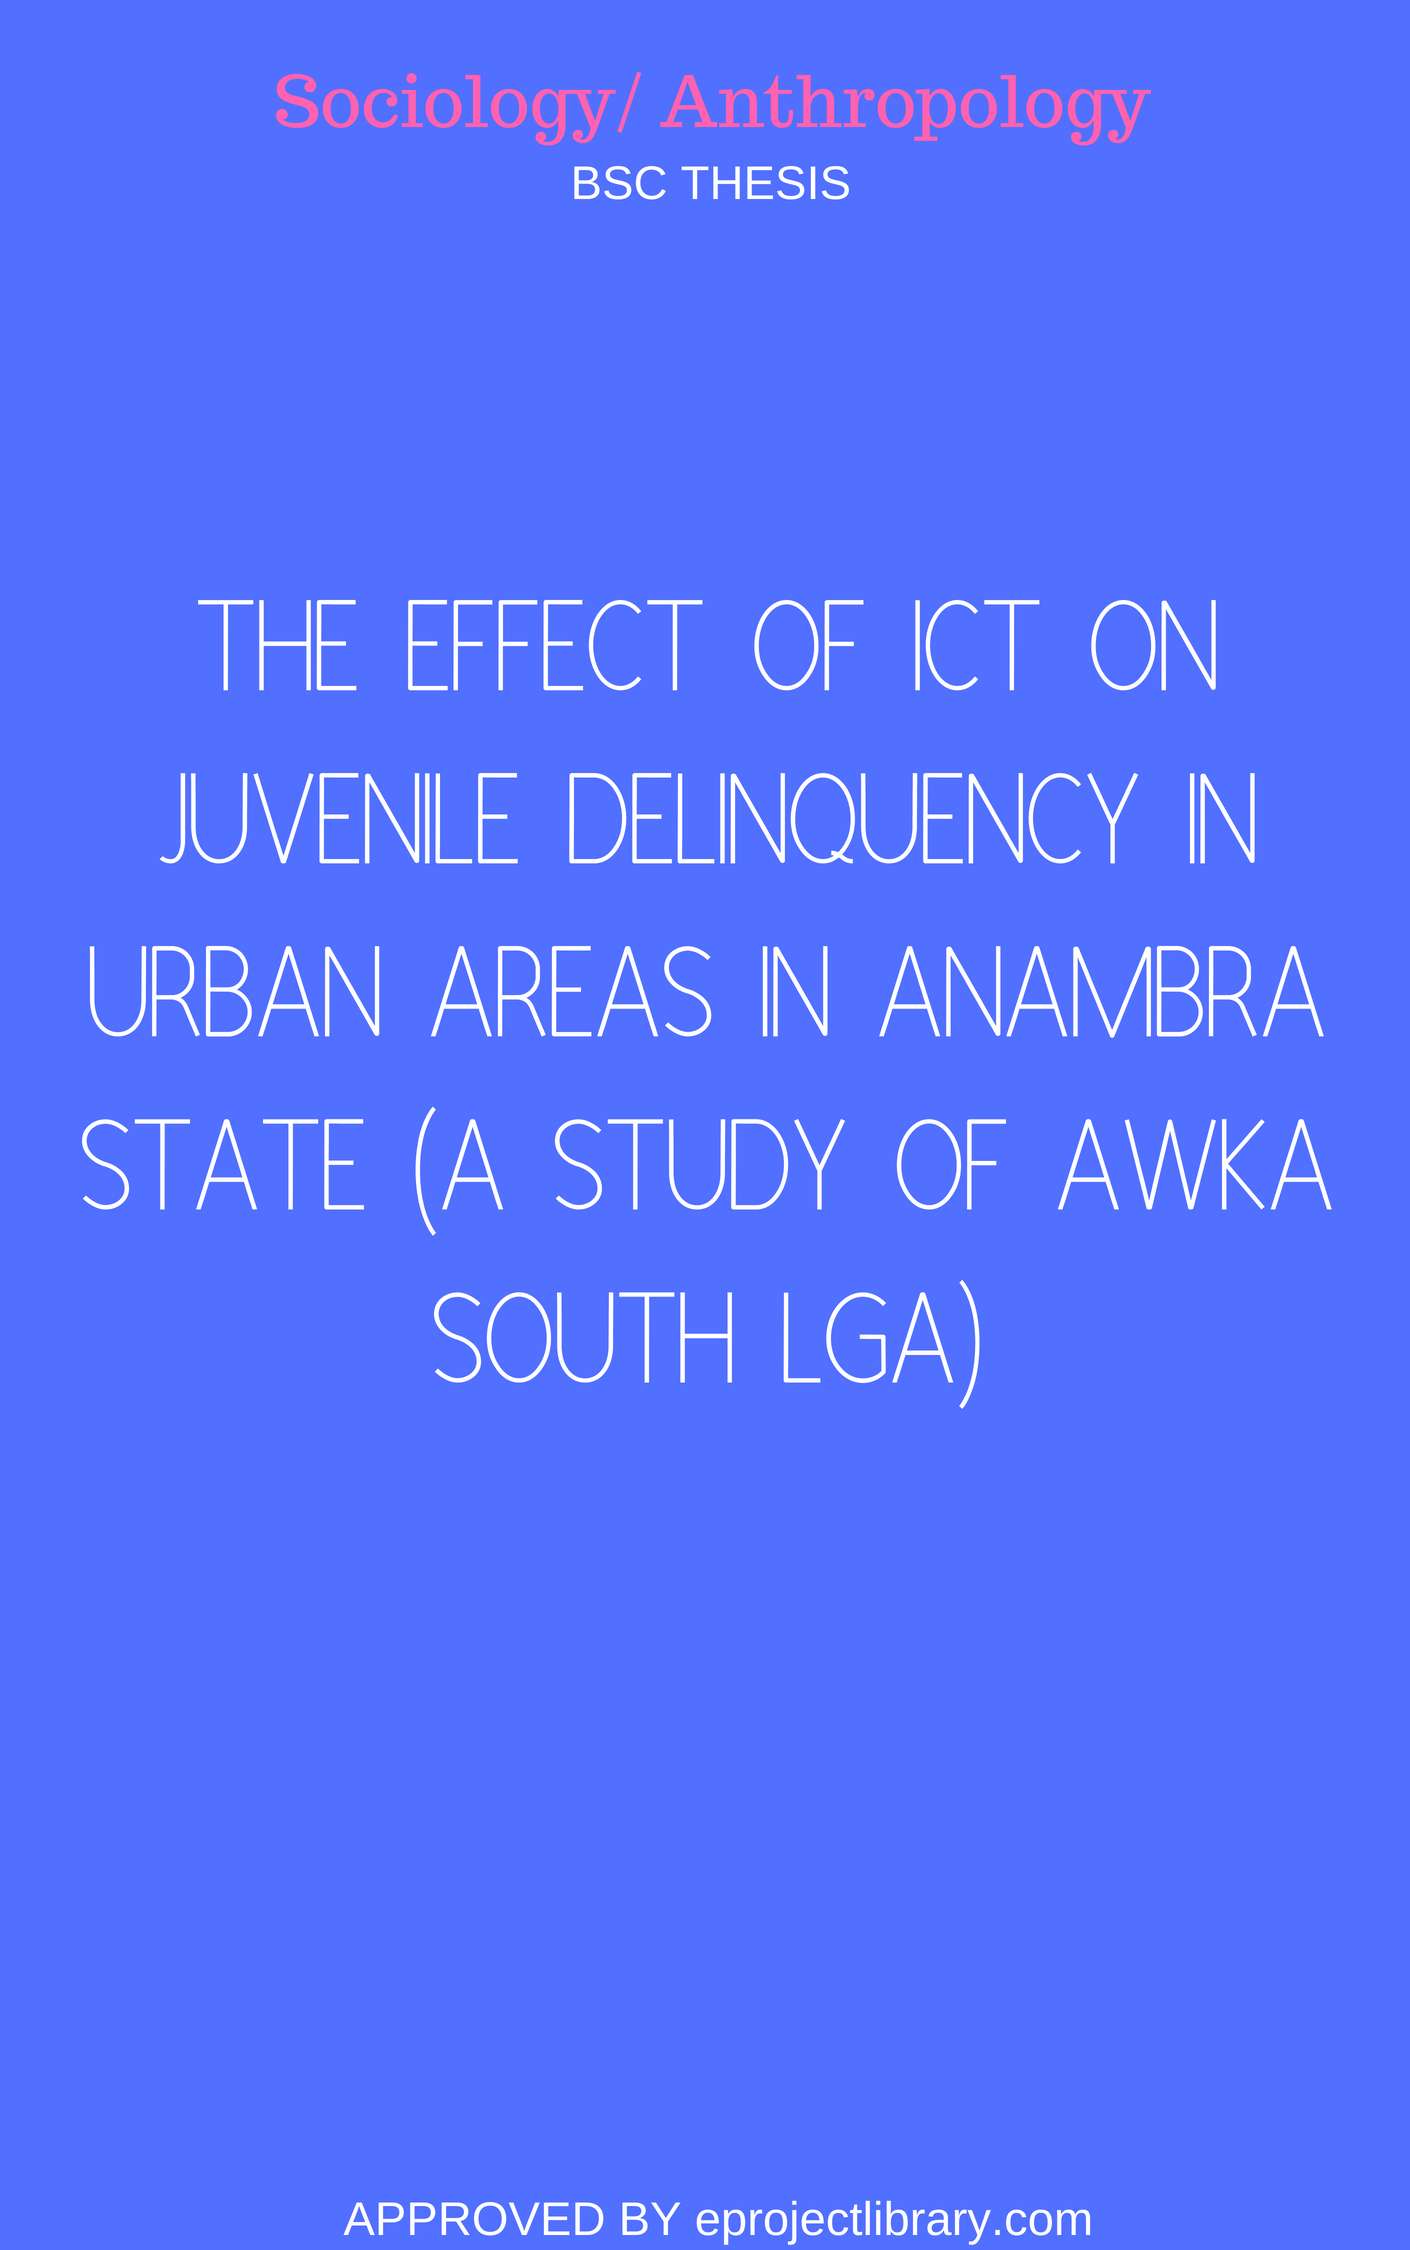 Juvenile Delinquency And Impact Of Ict In Urban Areas In Anambra Pdf